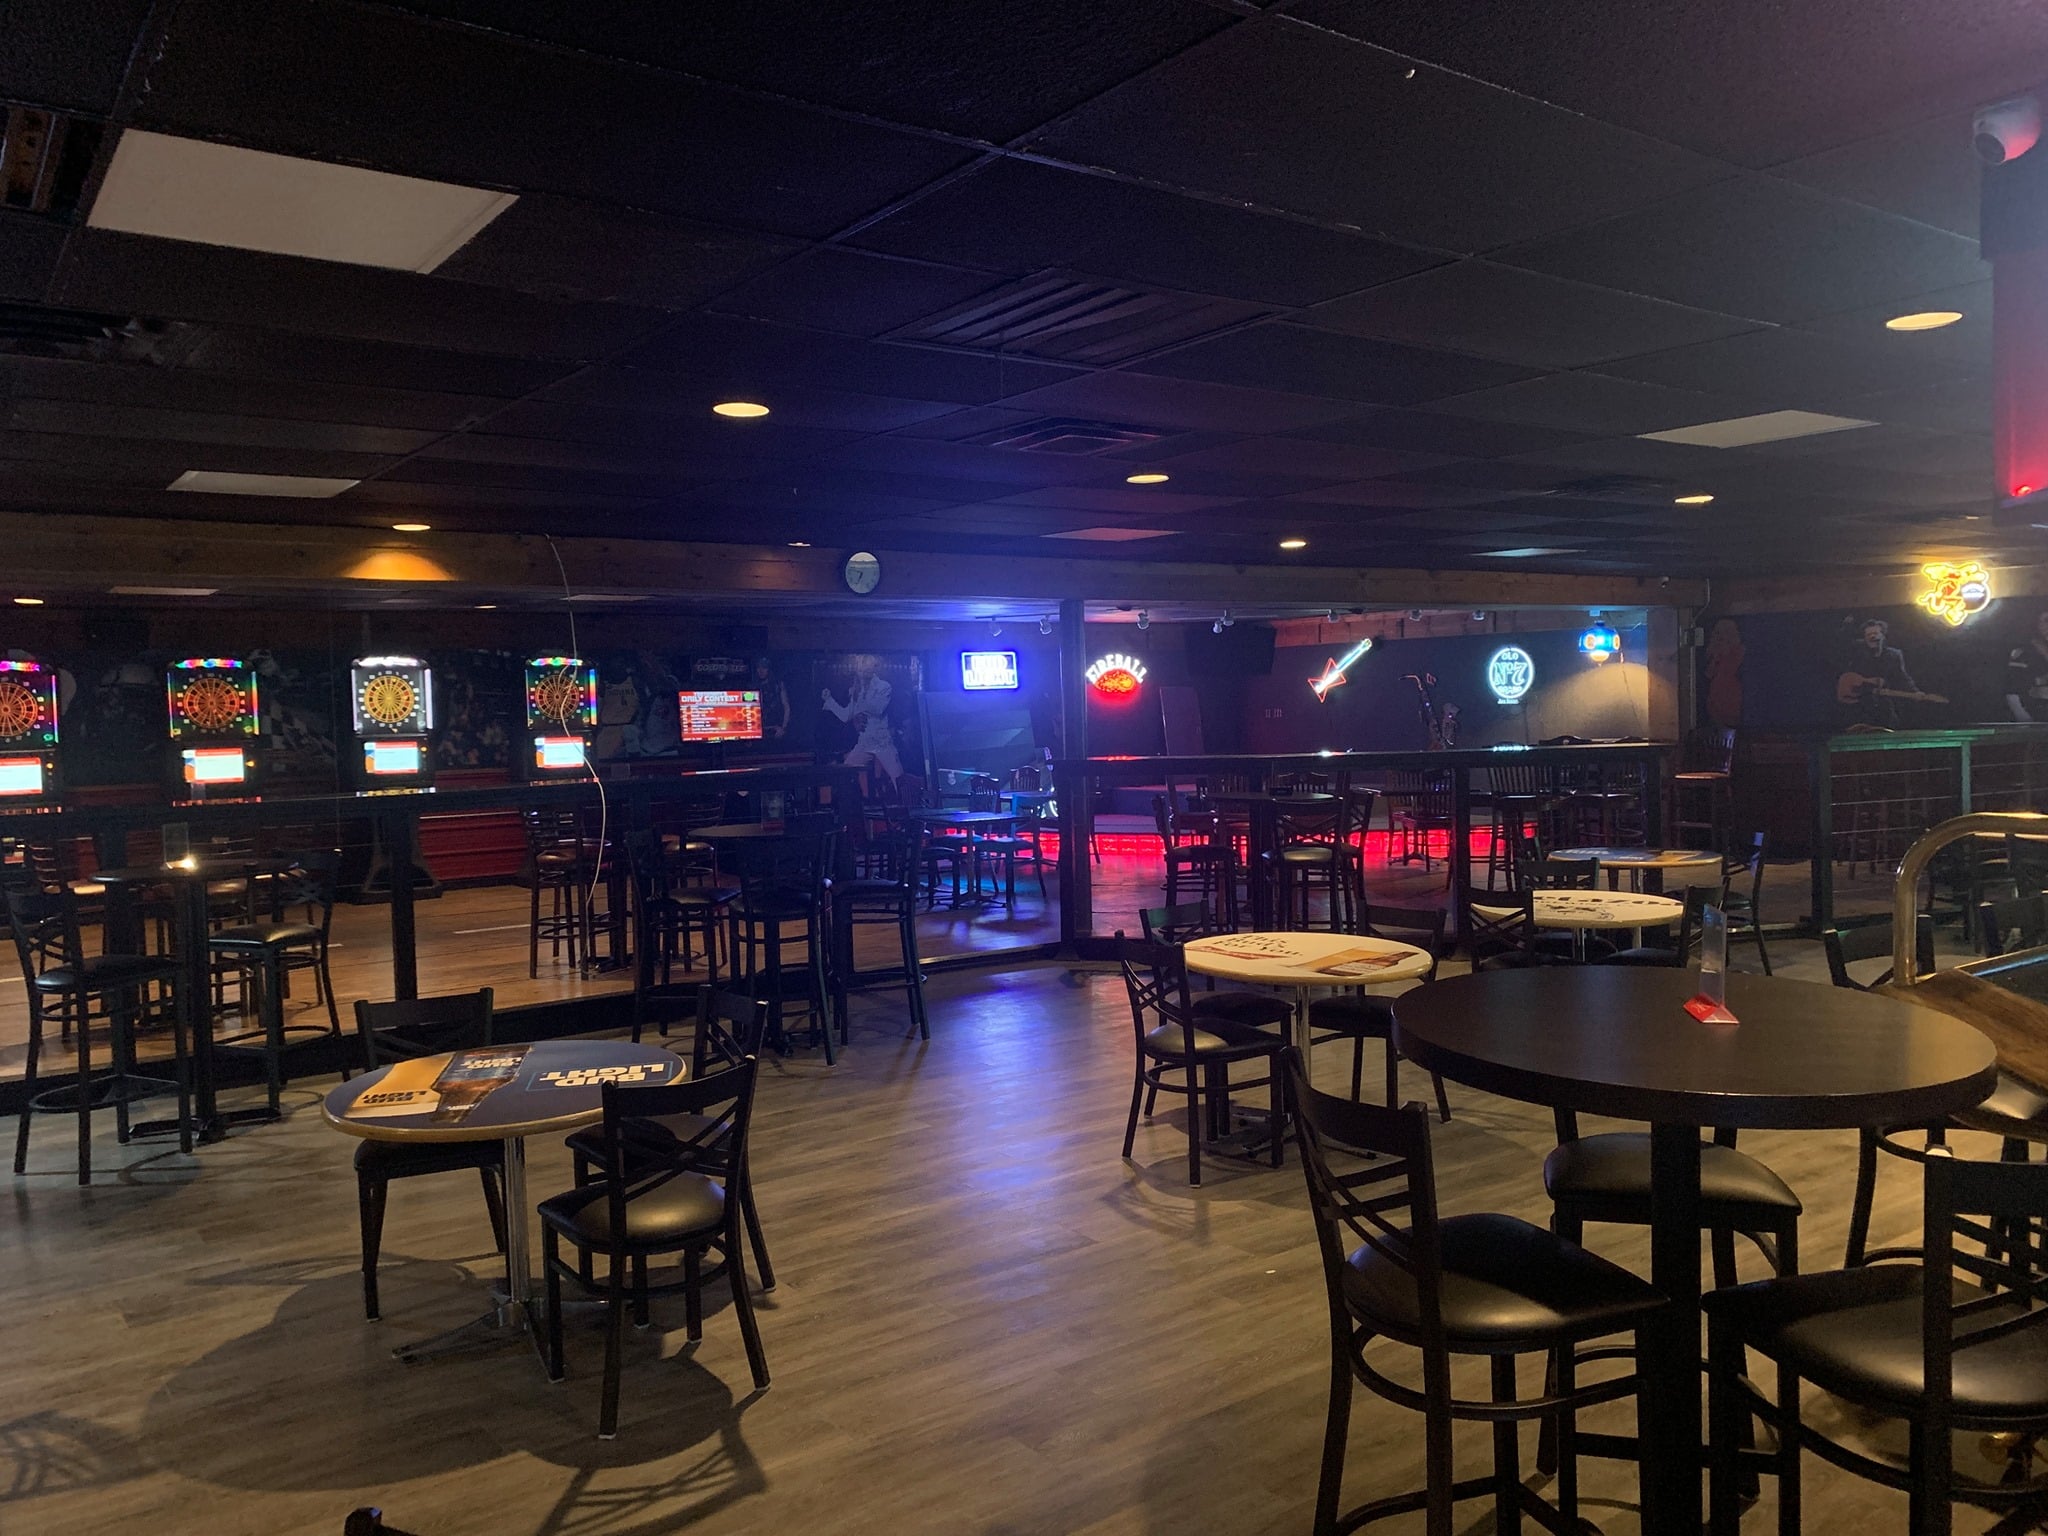 The Chaparral Sports Bar and Grill